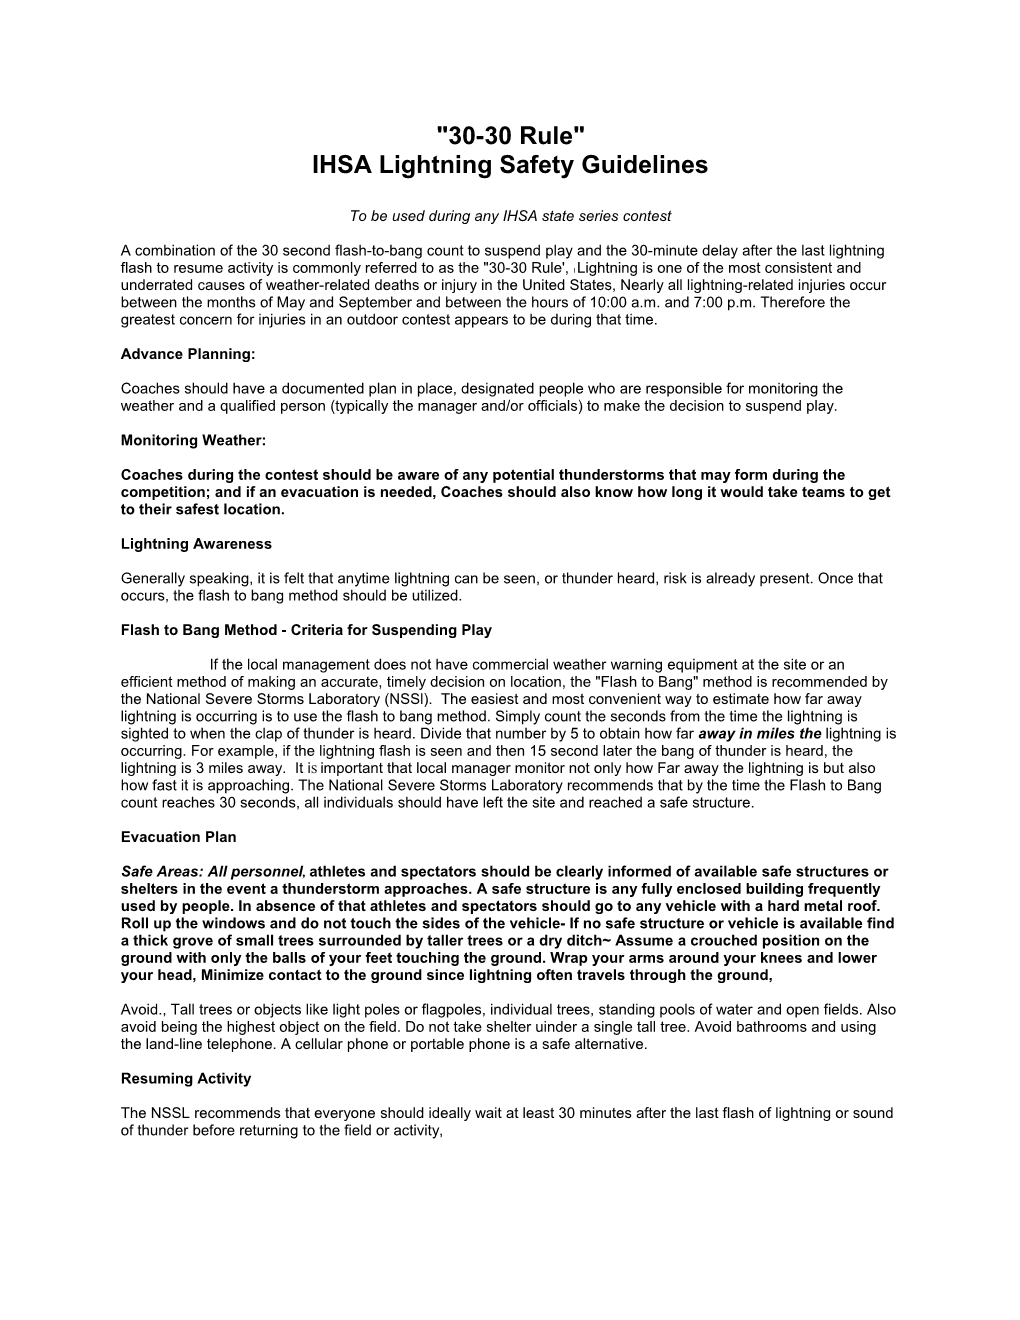 IHSA Lightning Safety Guidelines